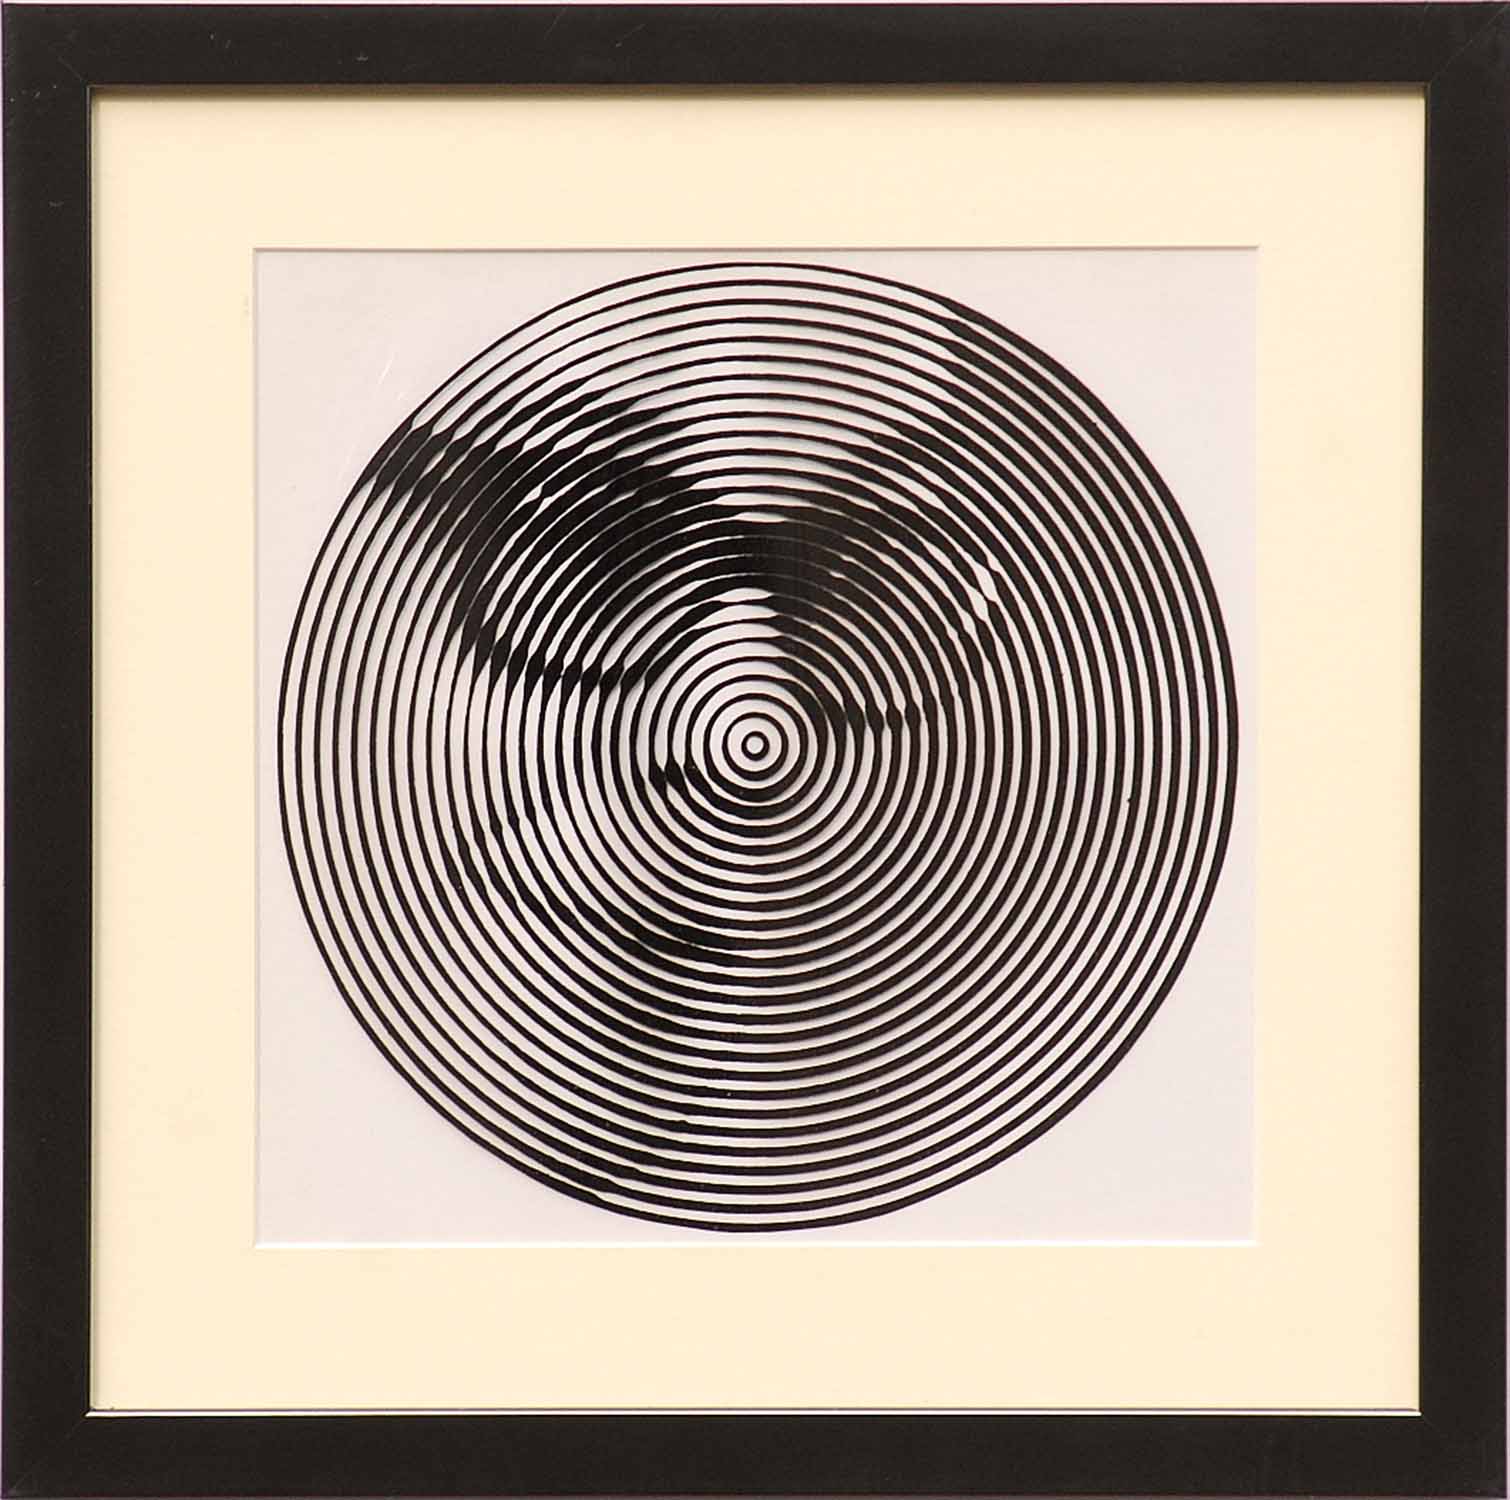 VICTOR VASARELY, 'Mylar and Spots', 30cm x 30cm, framed and glazed.